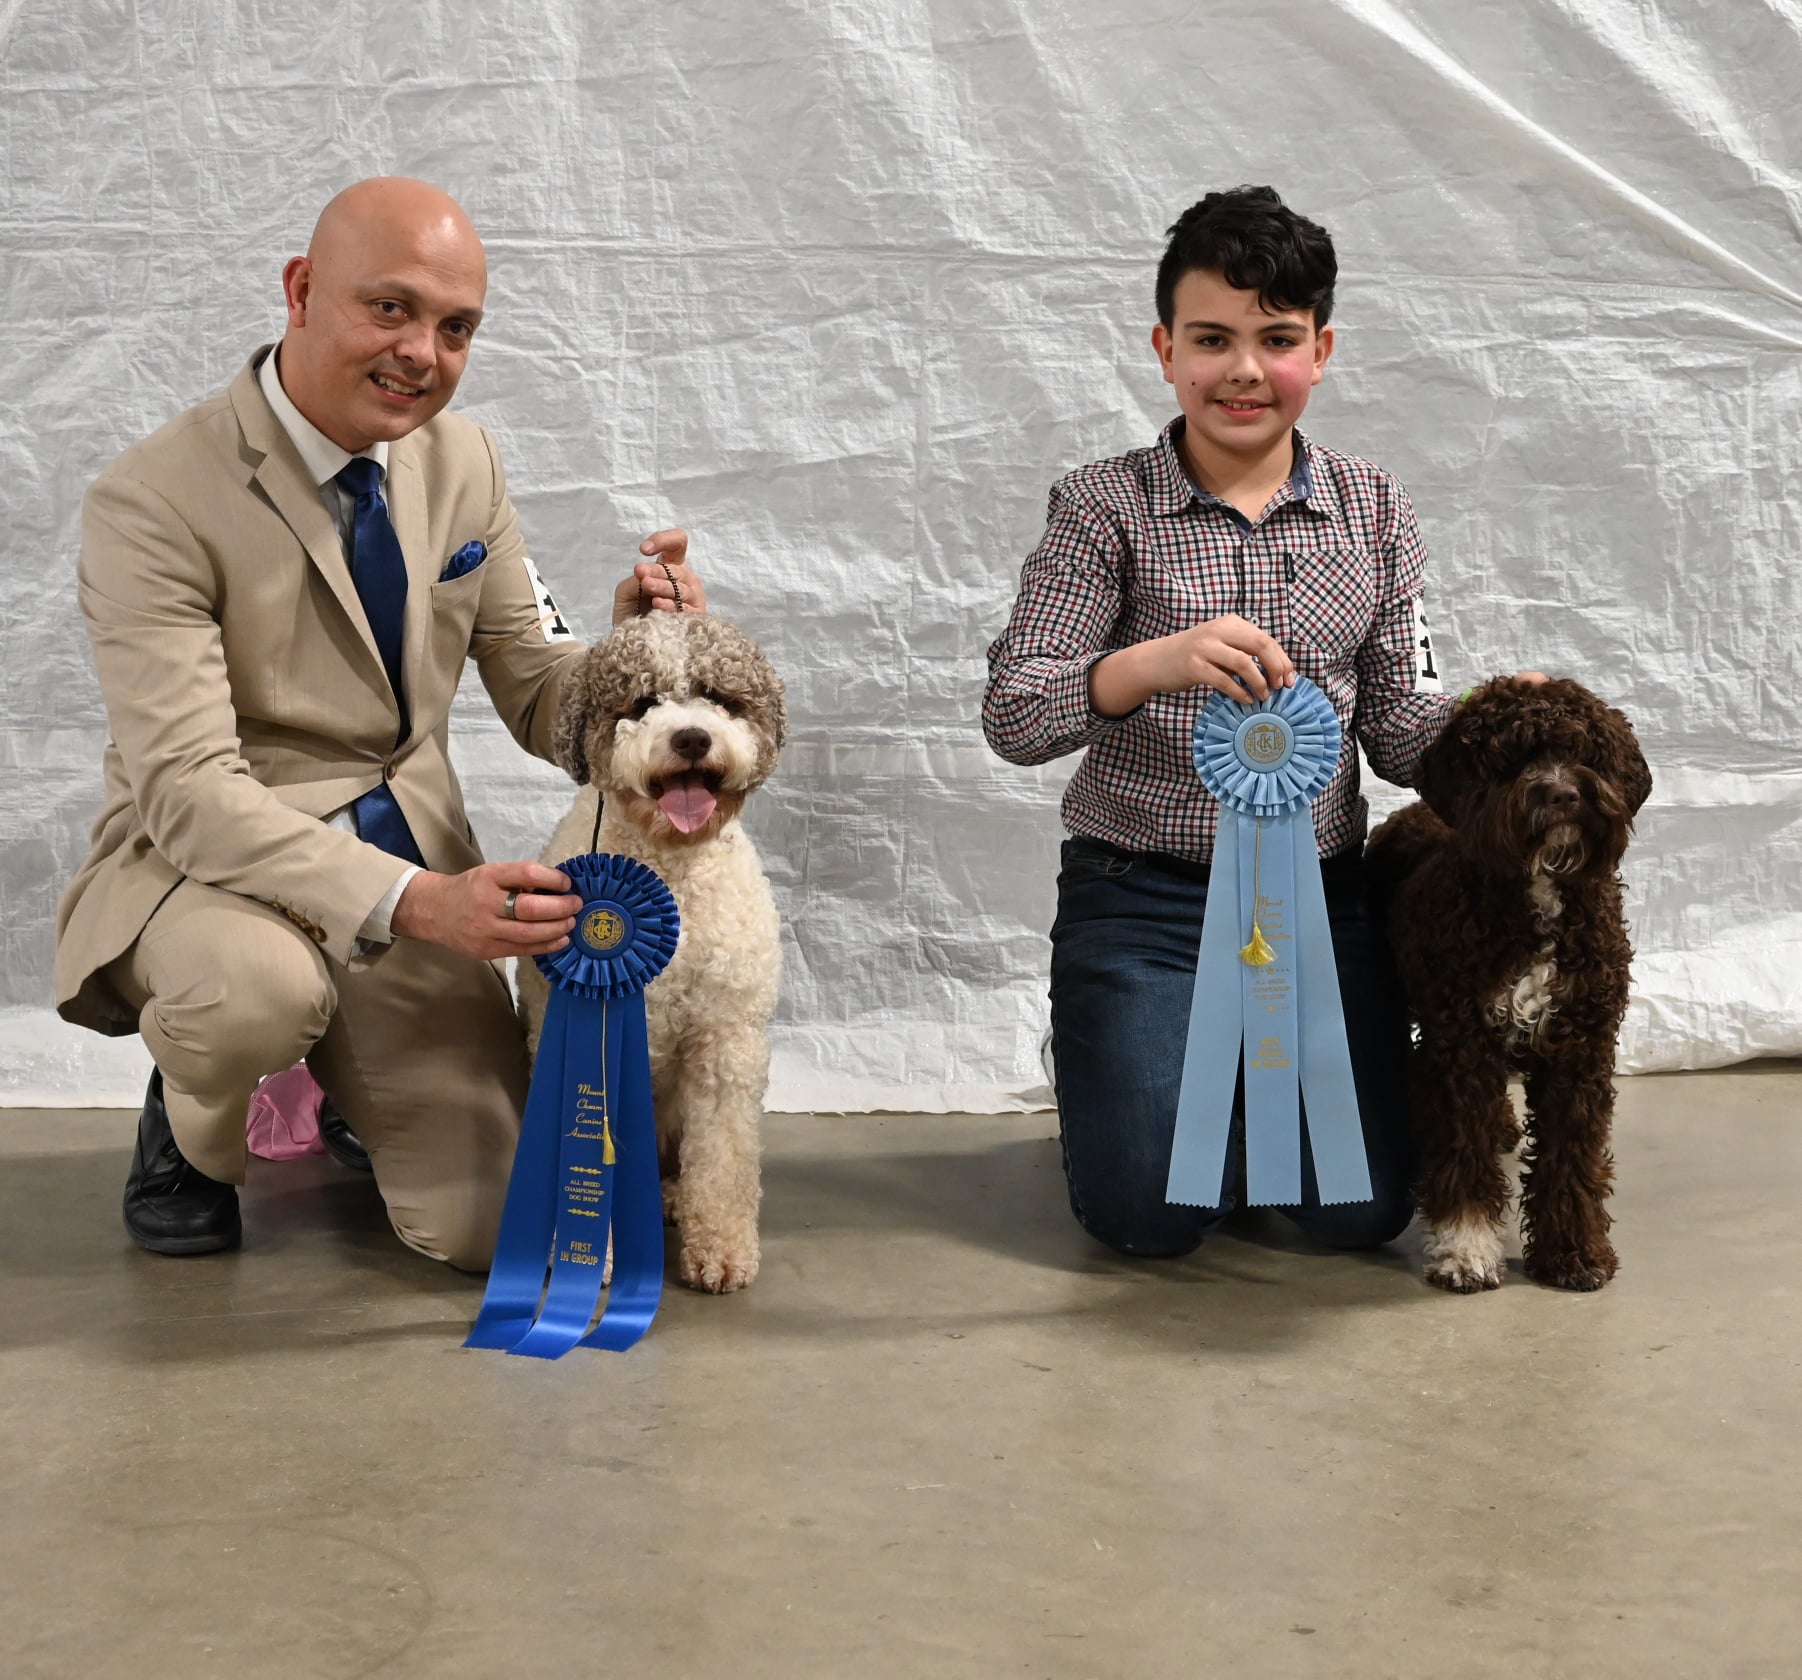 Two Lagotto Romagnolo Dogs at Dog Show with Ribbons